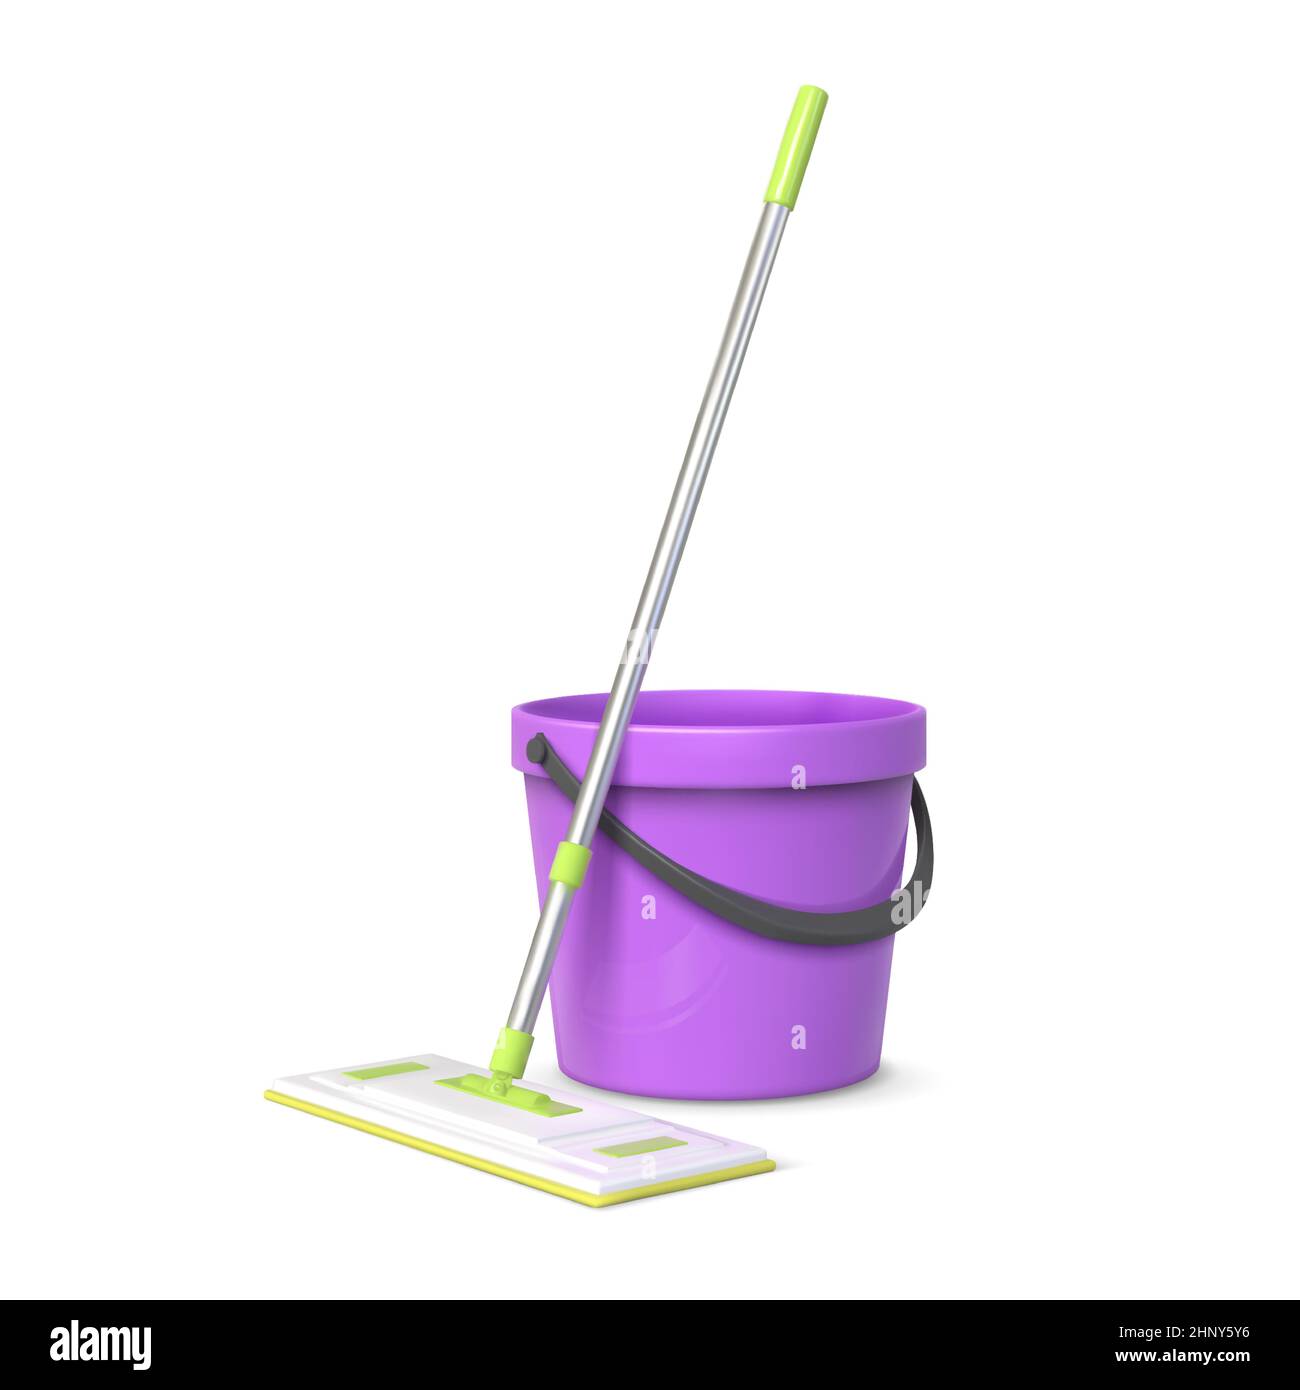 https://c8.alamy.com/comp/2HNY5Y6/realistic-3d-rag-mop-and-plastic-bucket-floor-cleaning-equipment-sponge-broom-and-pail-house-cleanup-tools-and-wet-floor-vector-concept-items-for-2HNY5Y6.jpg